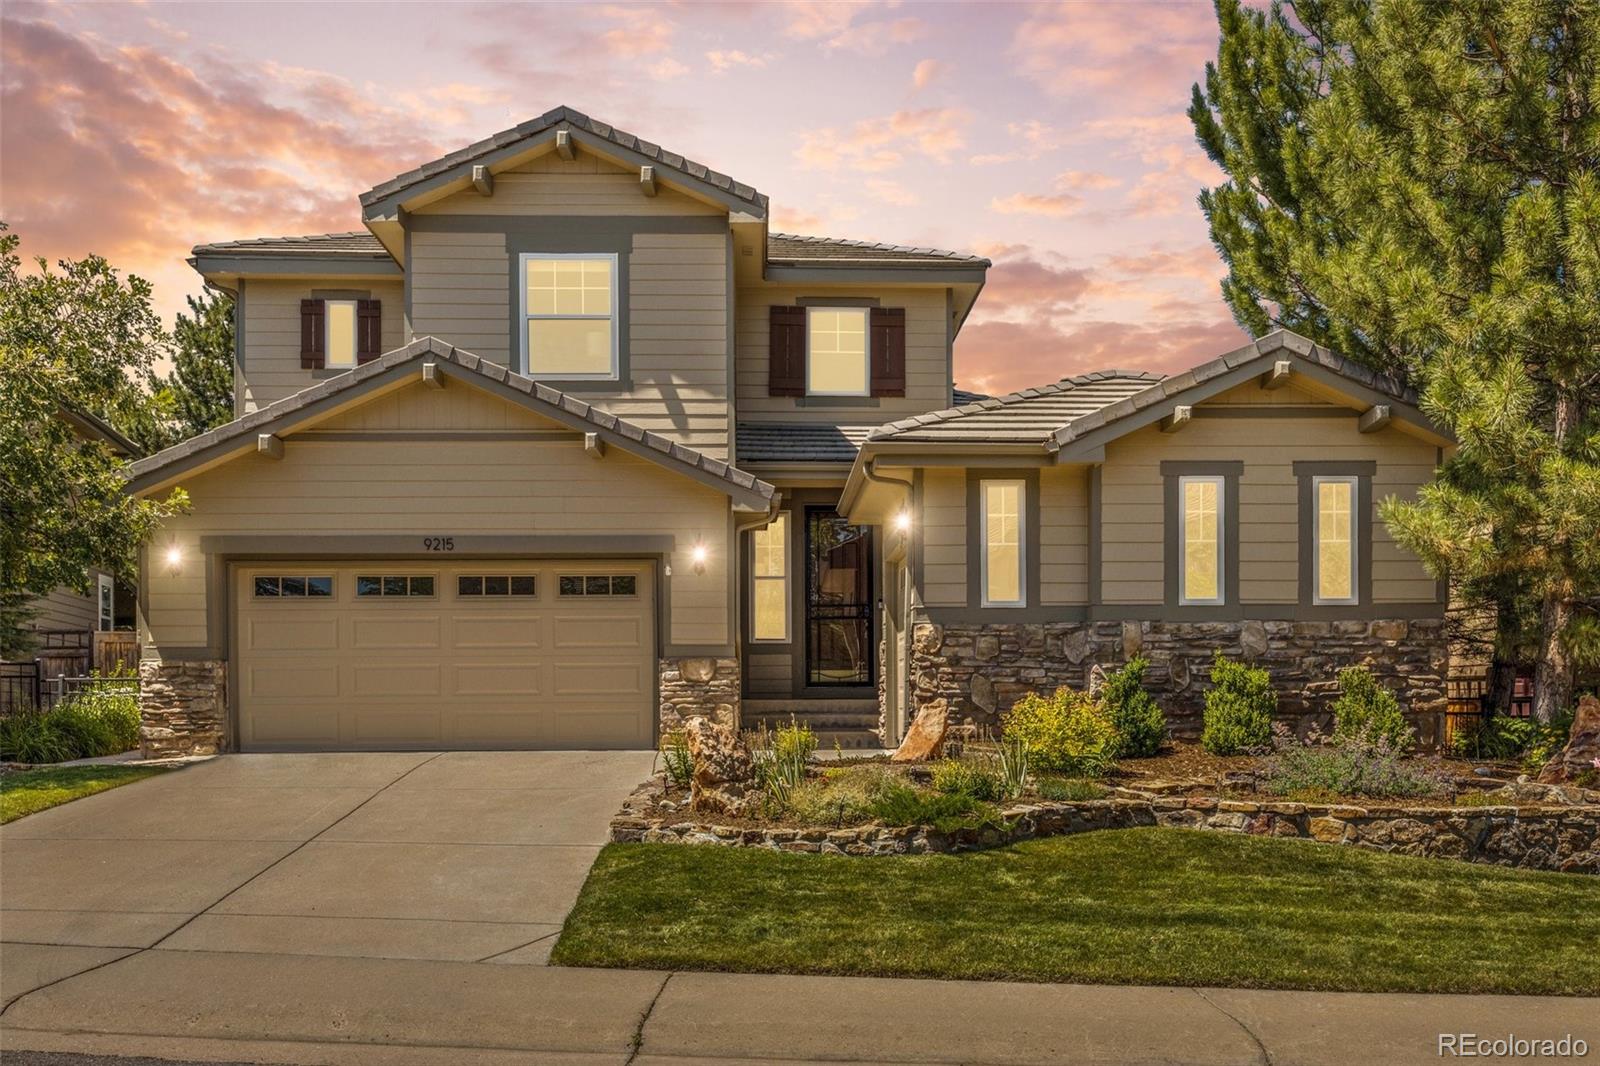 9215  aspen creek point, highlands ranch sold home. Closed on 2023-10-25 for $900,000.